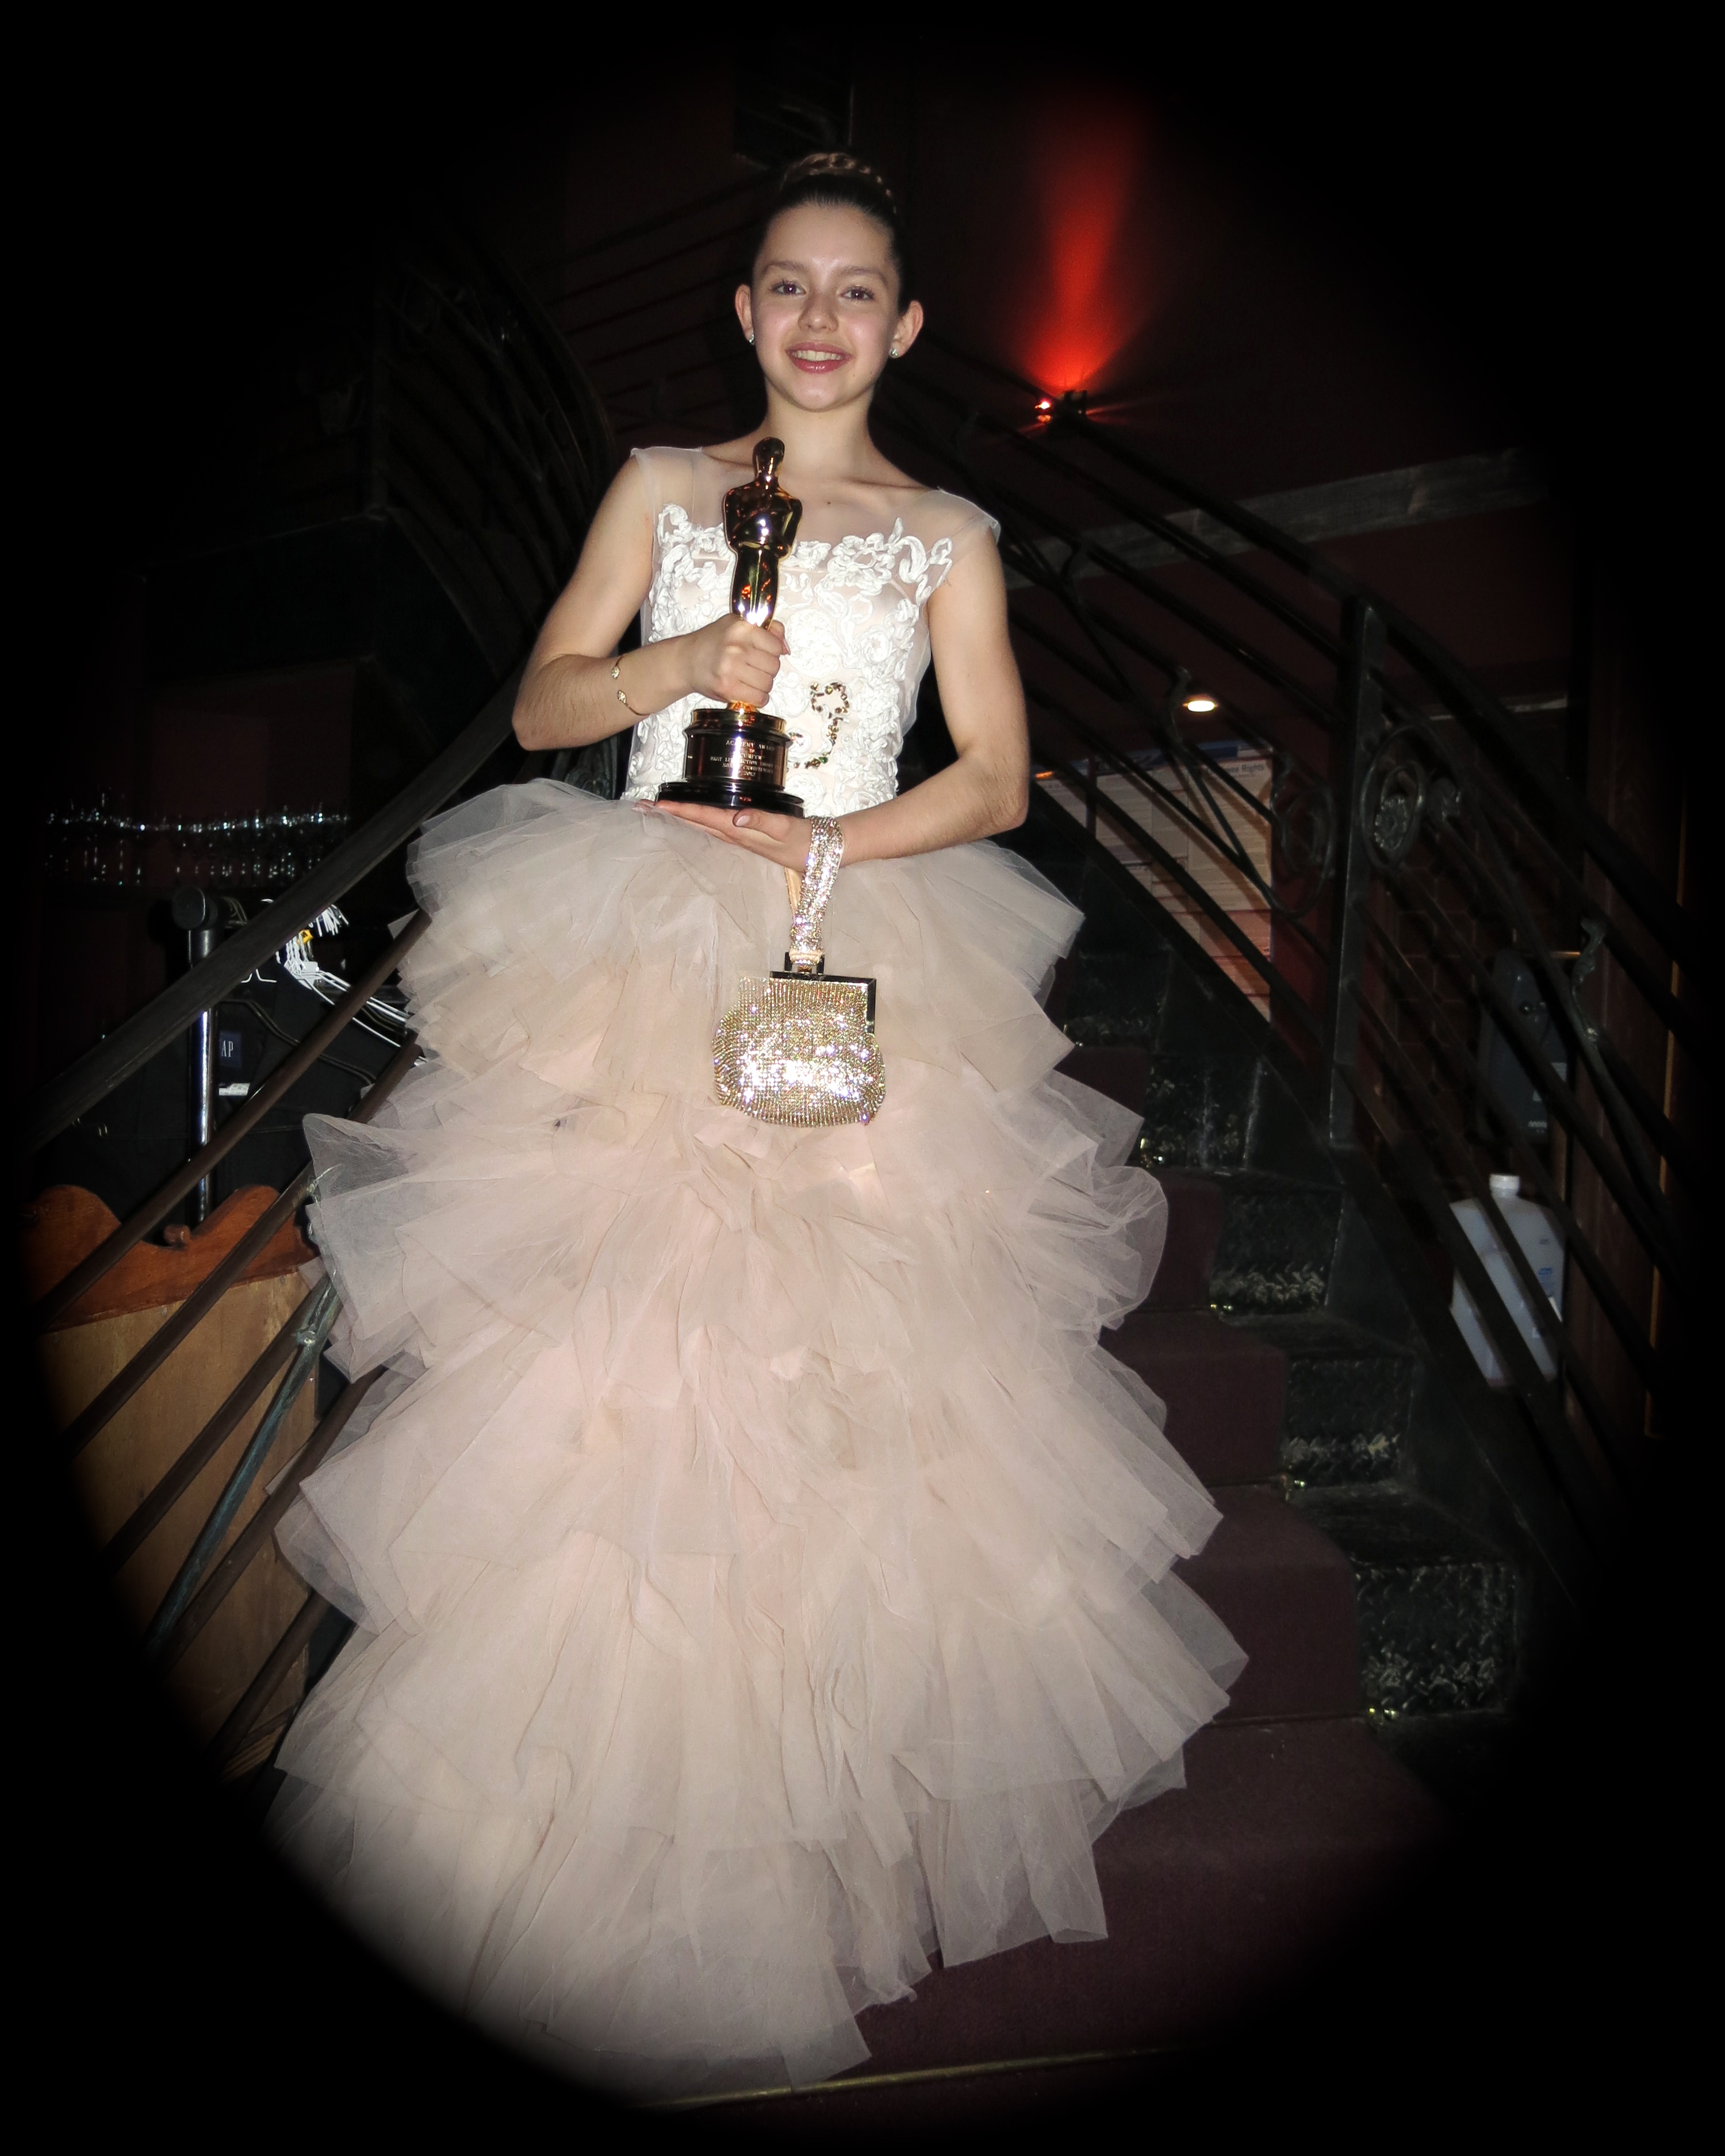 Actress Fátima Ptacek with the Oscar for Best Live Action Short awarded to CURFEW, the film in which she has the lead actress role. February 24, 2013